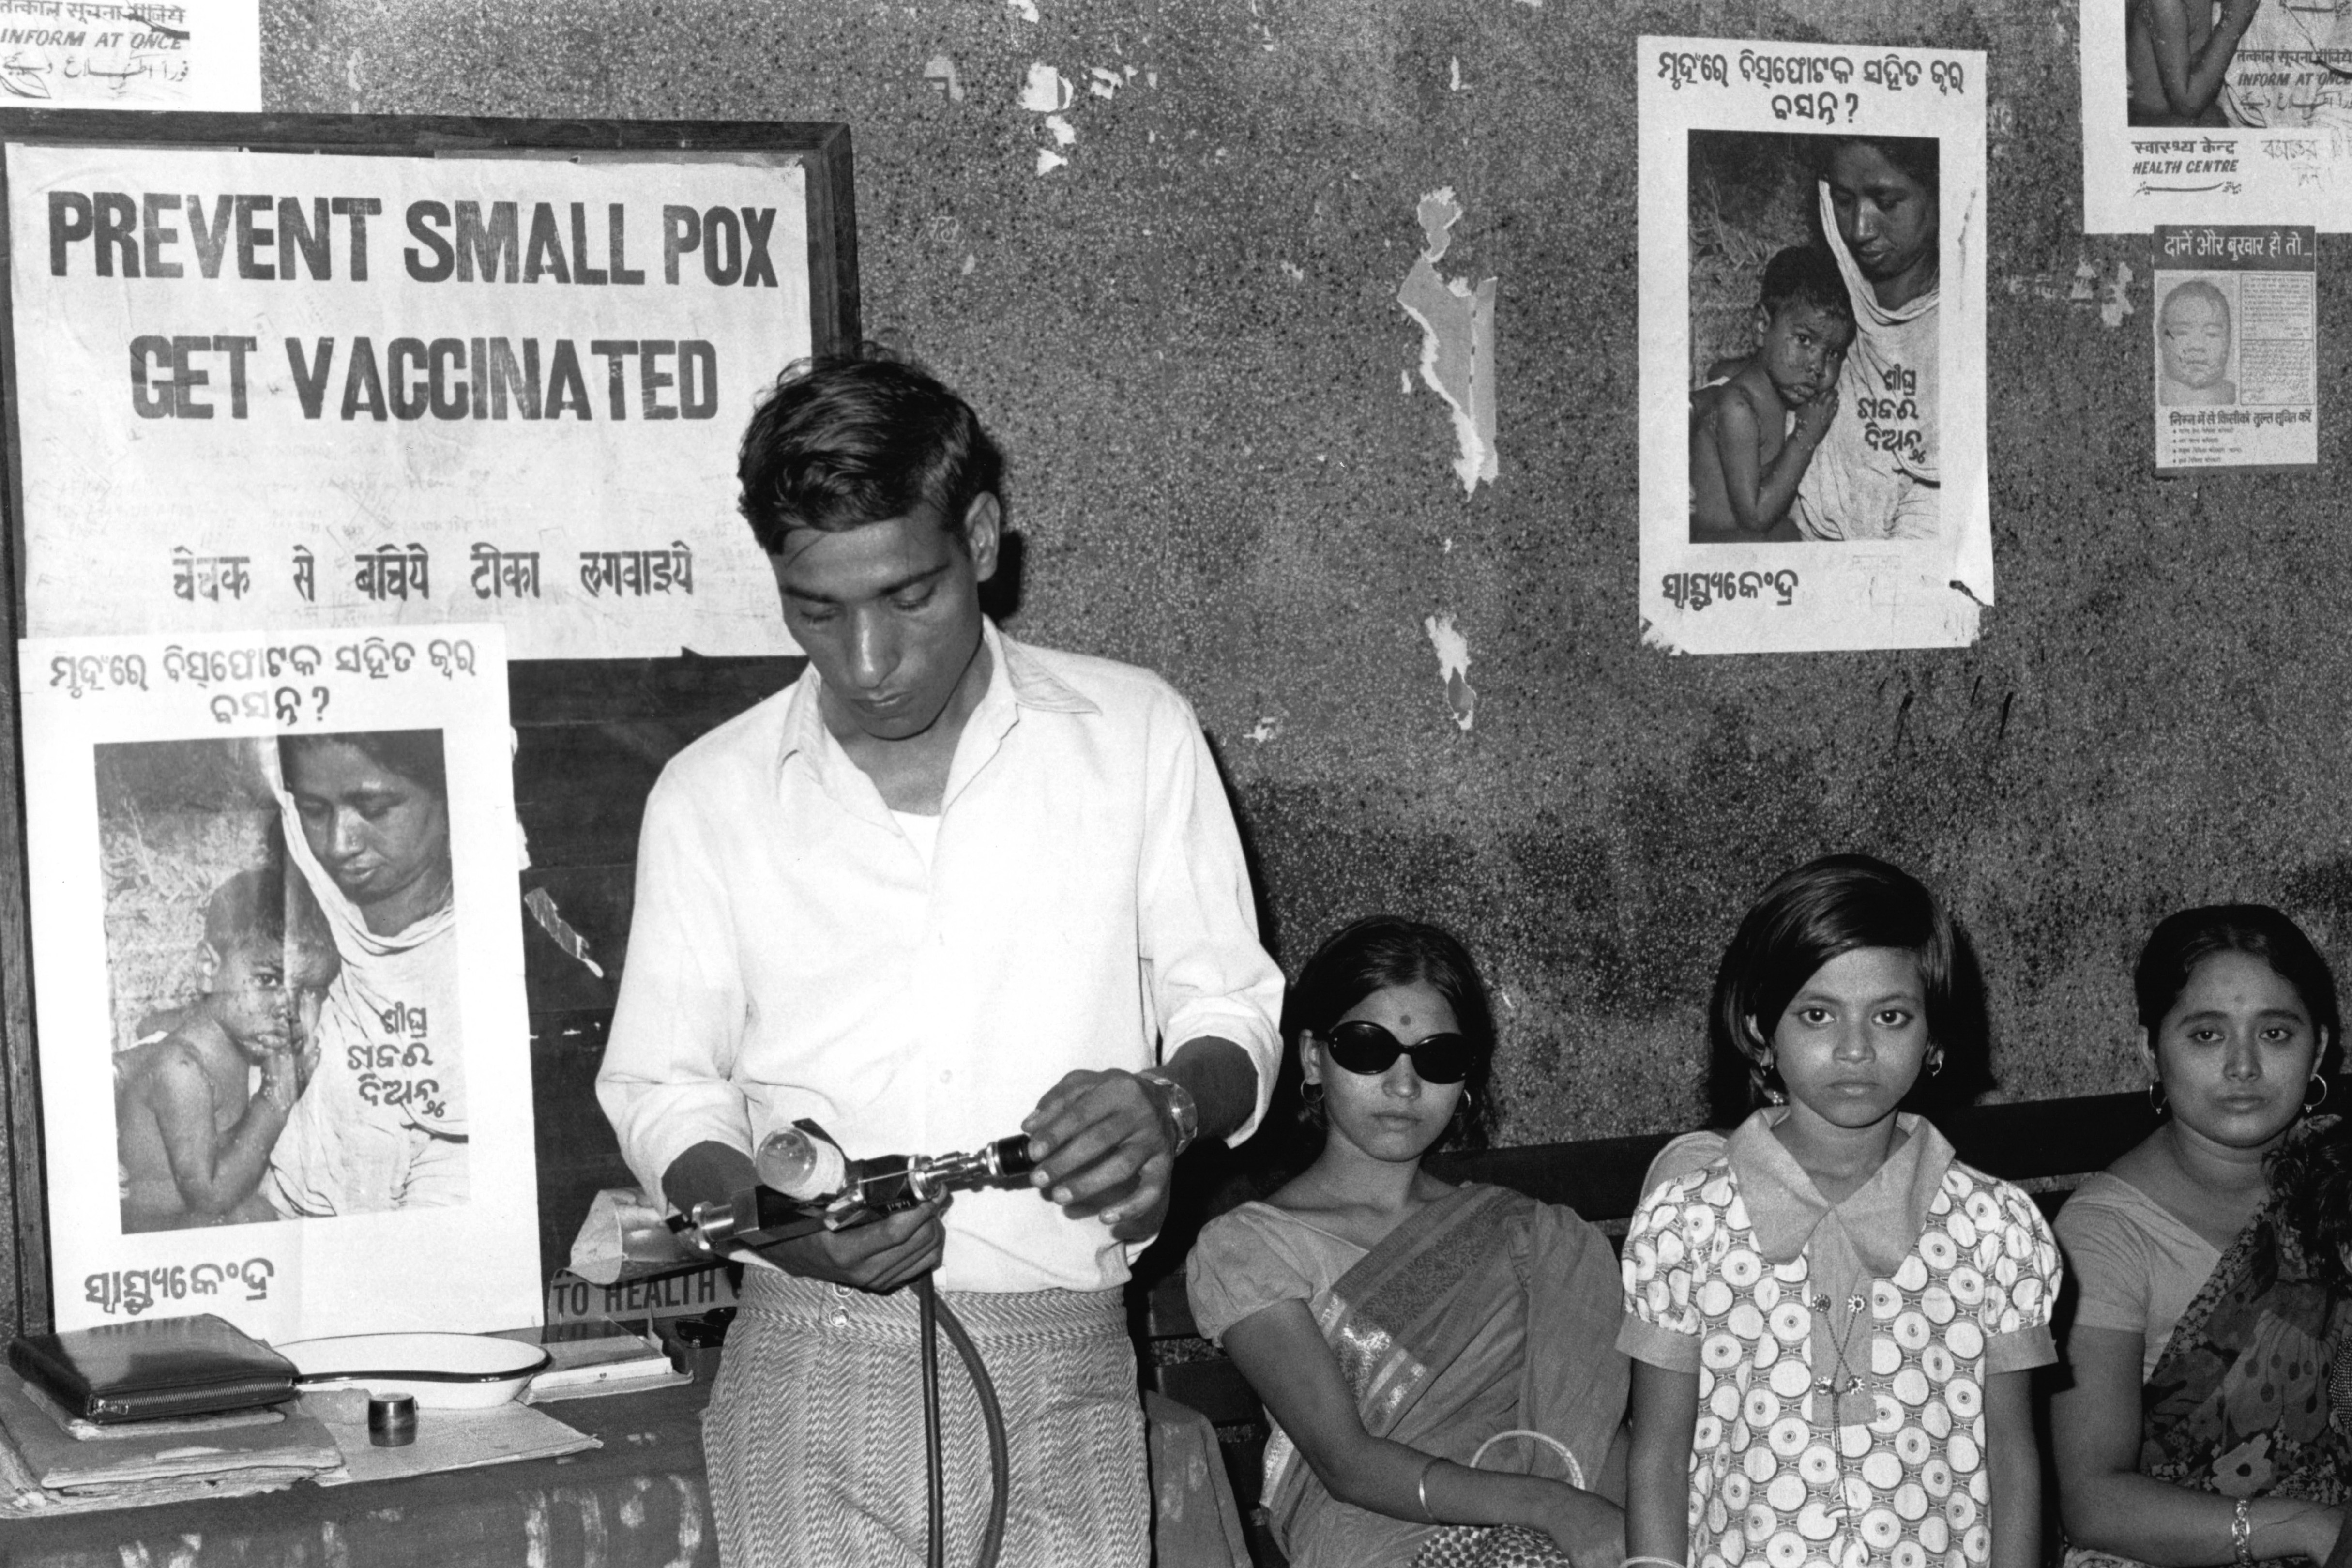 In this 1974 black-and-white film photograph, a health worker stands beside two women and a young girl who are waiting to be vaccinated. He holds a jet injector – a gun-shaped medical instrument that uses compressed air to force liquid vaccine through the skin without a needle. Beside him and on the walls are posters that say, “Prevent Small Pox / Get Vaccinated,” and ones that show images of a mother holding a child with smallpox.